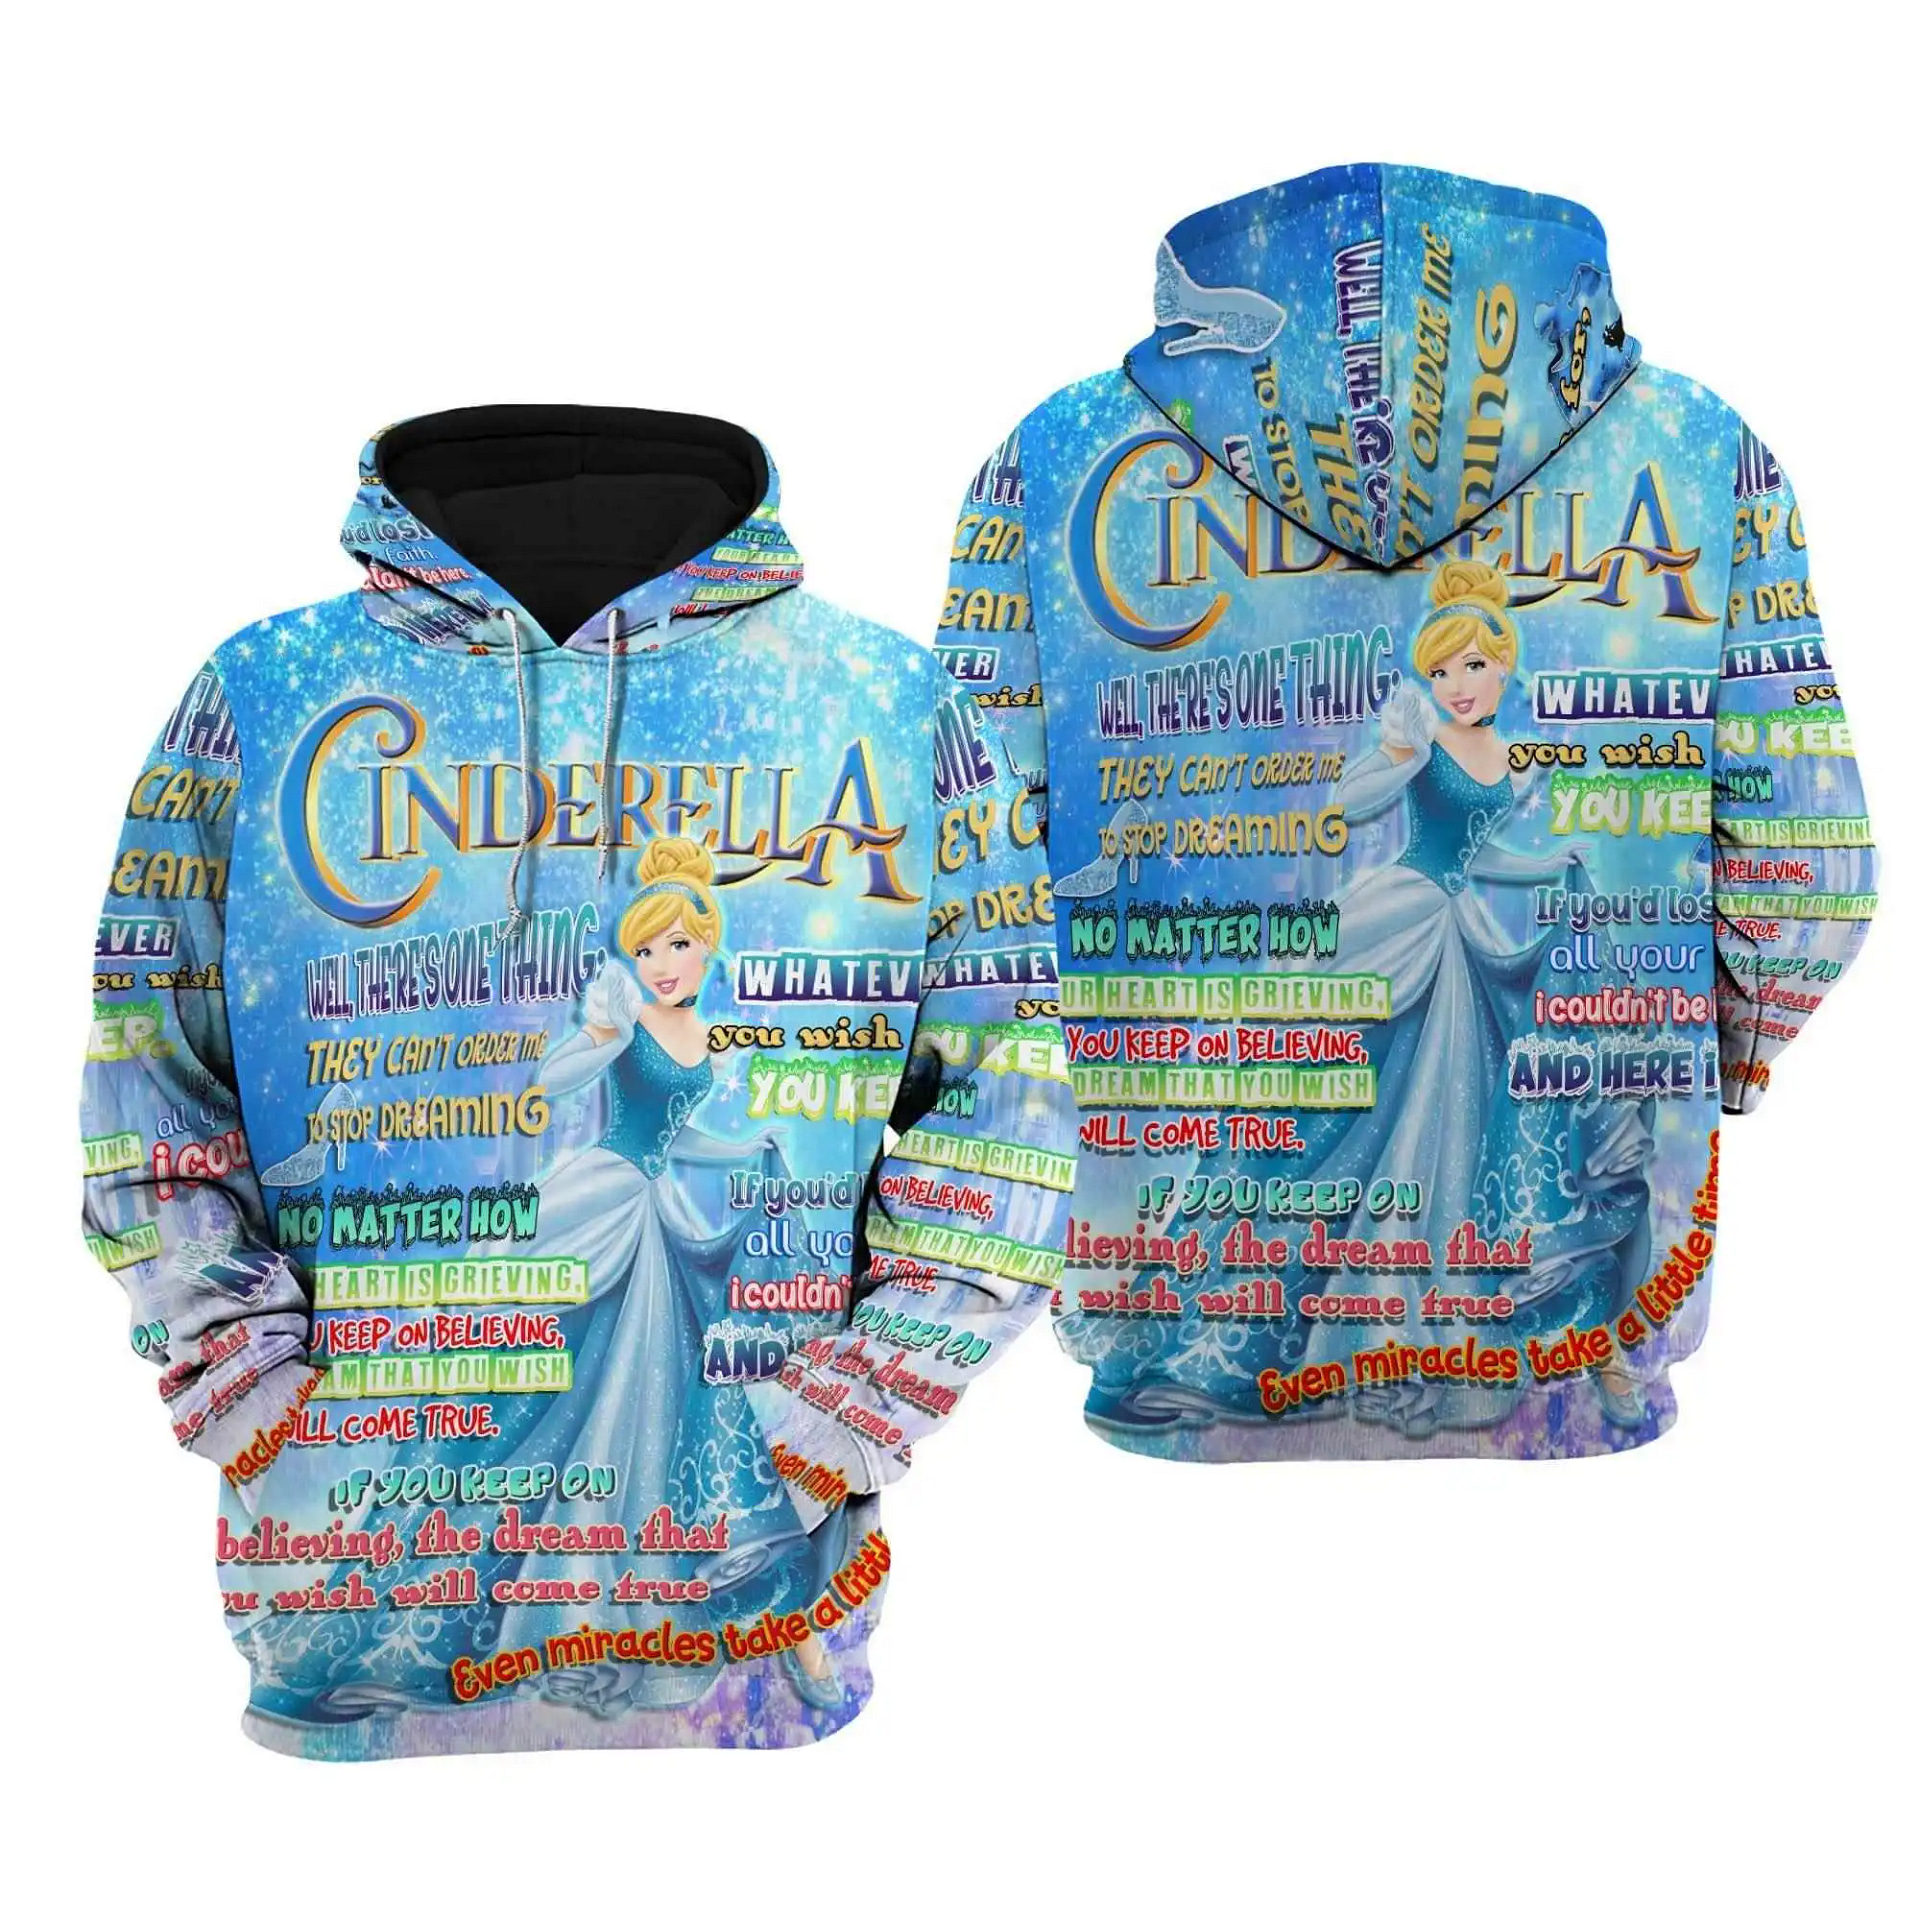 Cinderella Punk Words Pattern Disney Quotes Cartoon Graphic Outfits Clothing Men Women Kids Toddlers Hoodie 3D